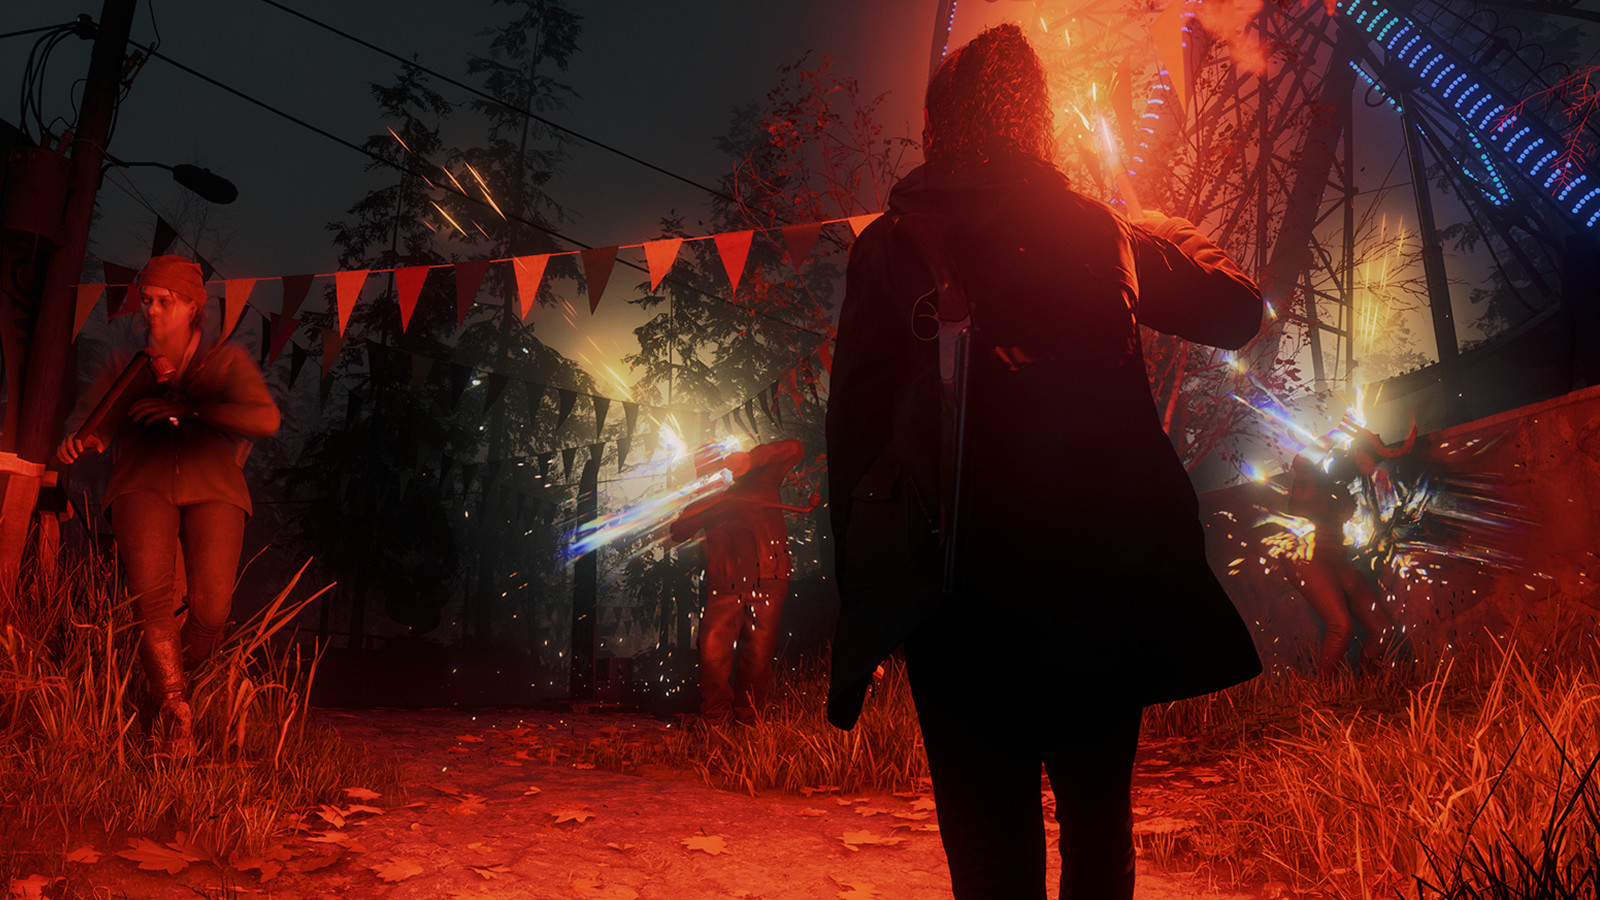 Alan Wake 2 Performance Benchmark Review - 30 GPUs Tested